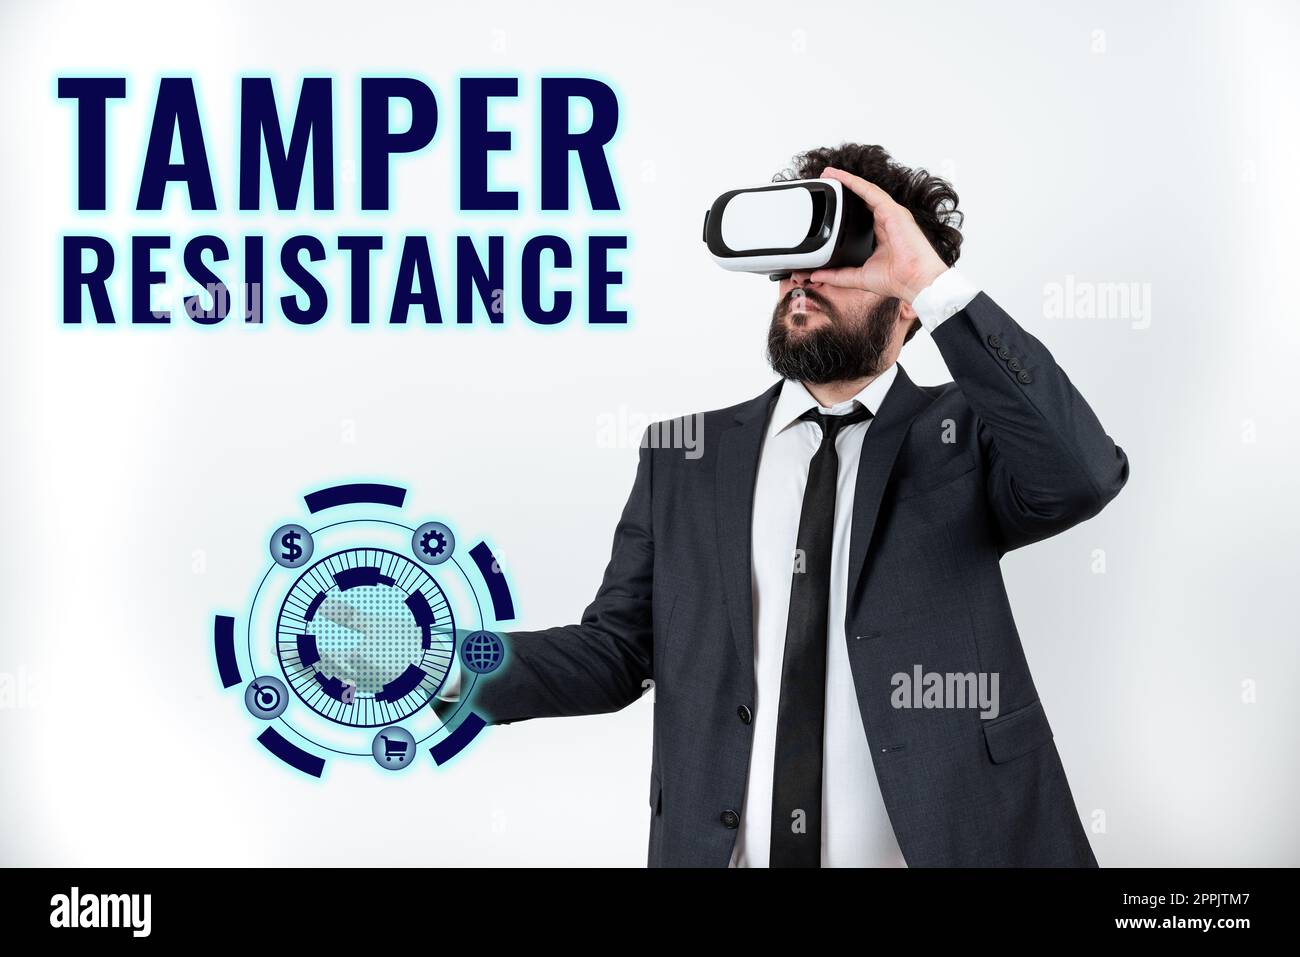 Text sign showing Tamper Resistance. Business idea resilent to physical harm, threats, intimidation, or corrupt persuasion Stock Photo